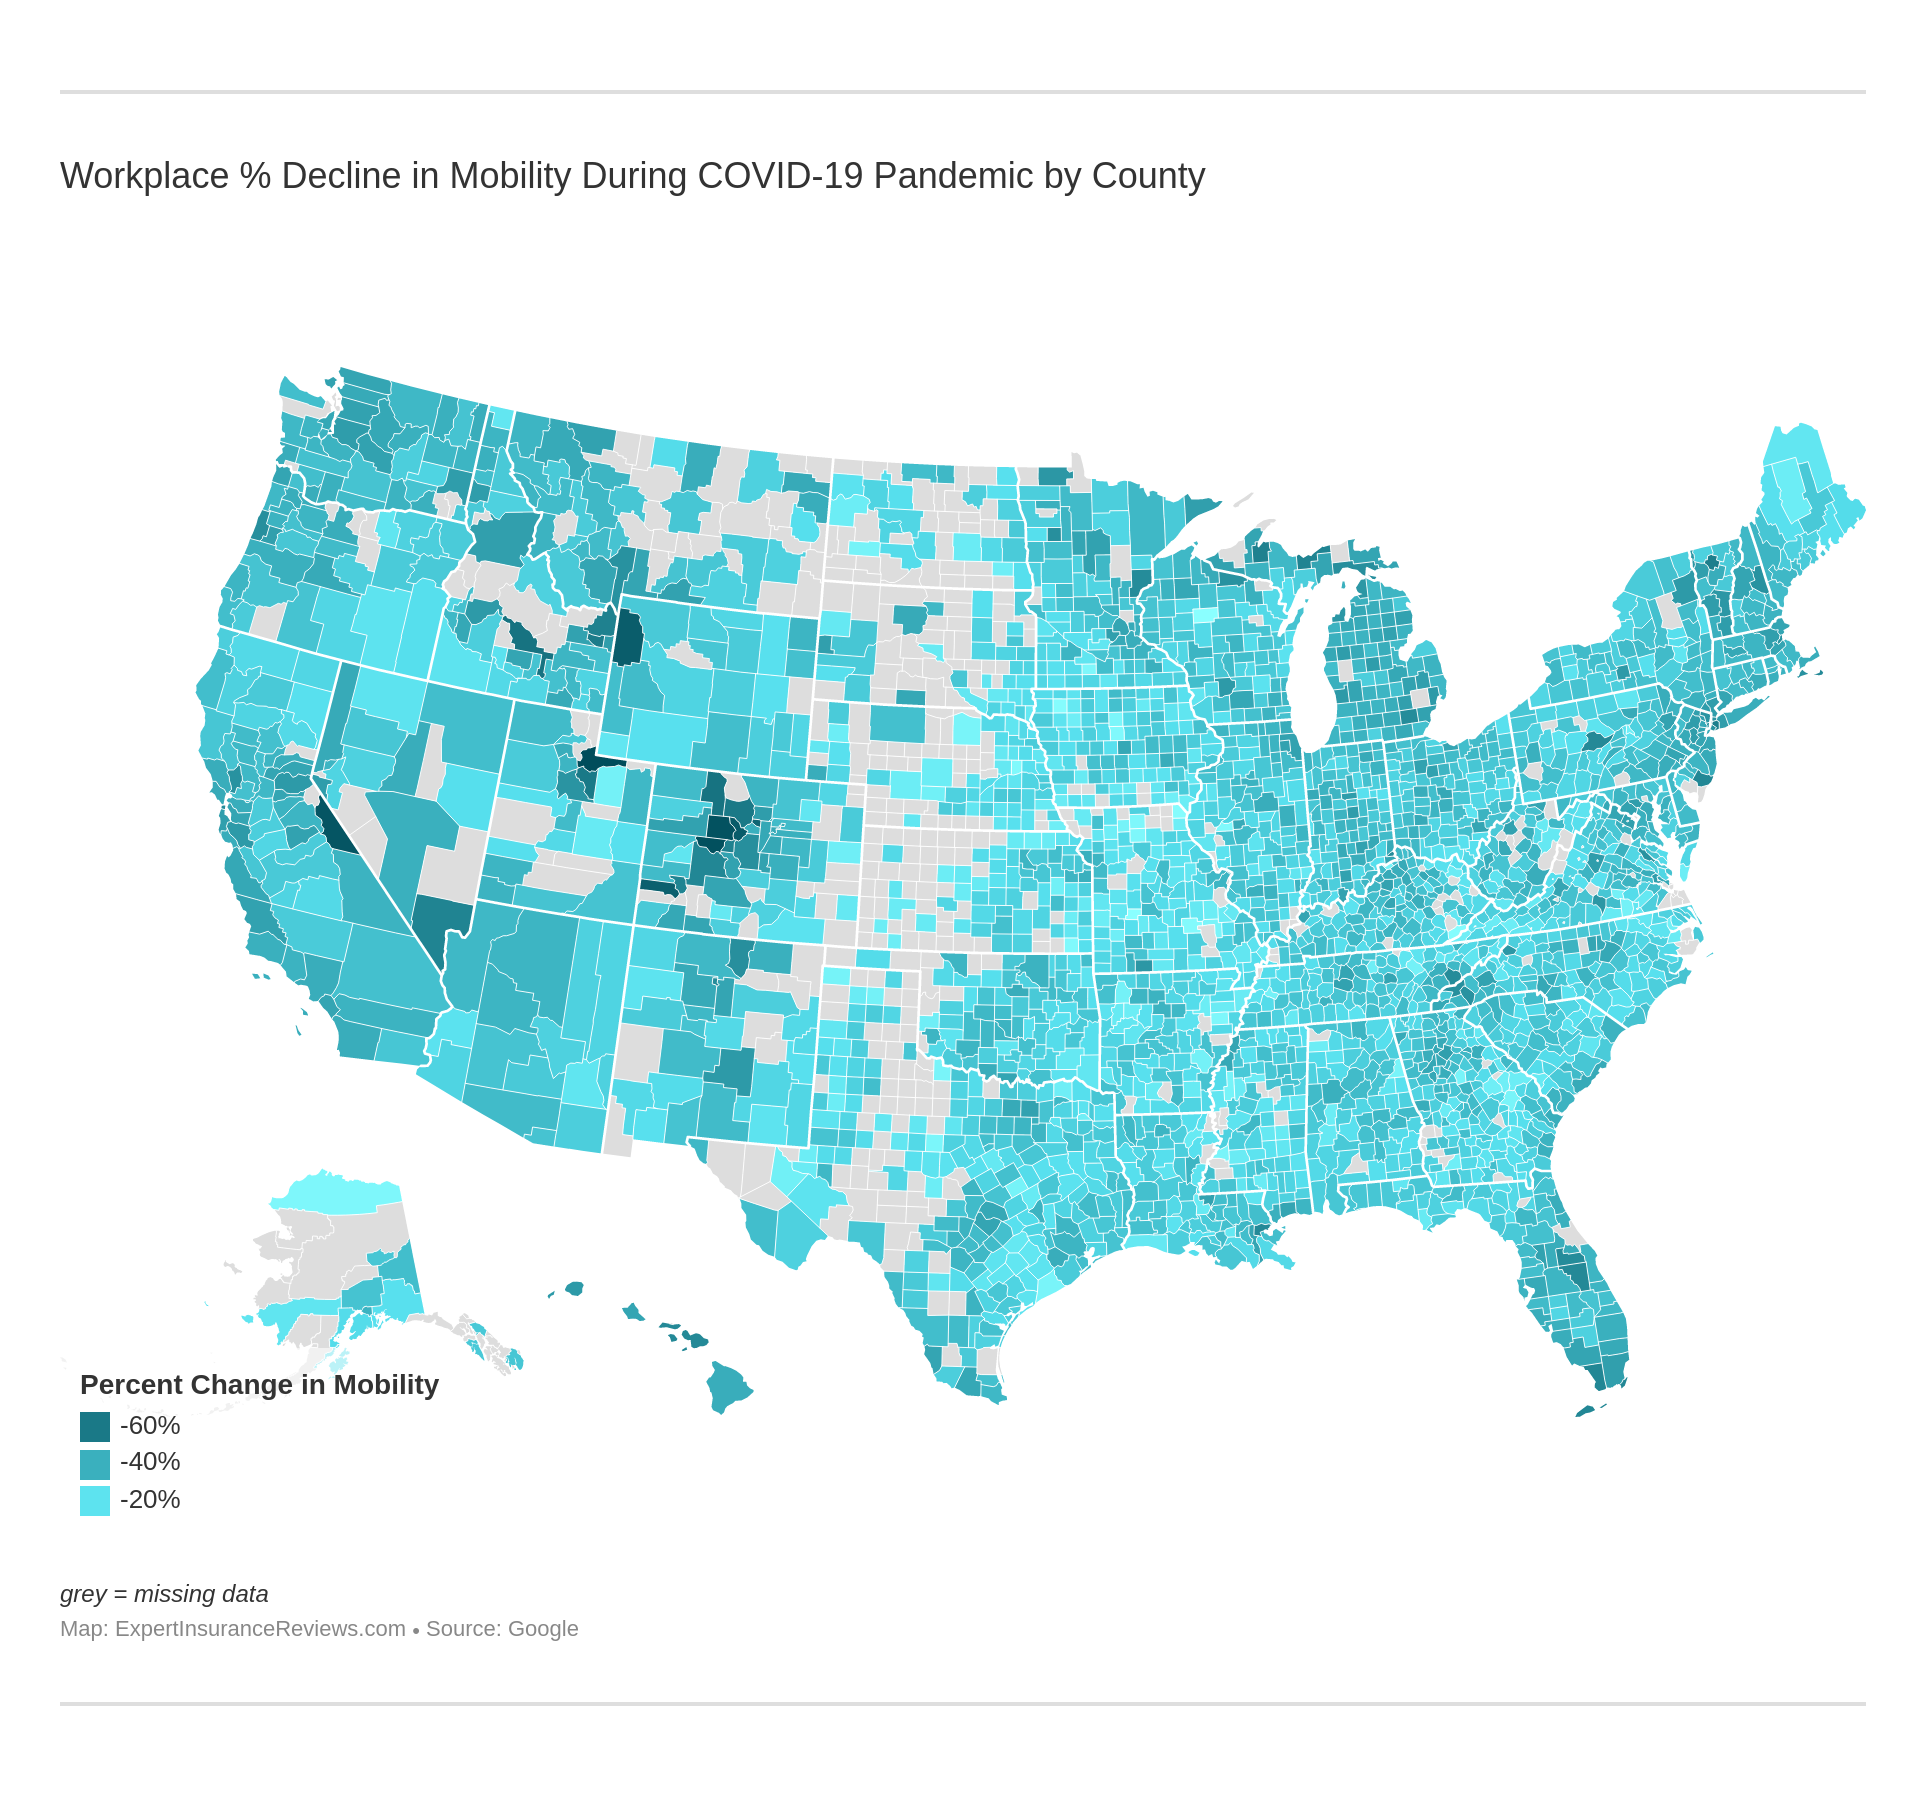 Workplace % Decline in Mobility During COVID-19 Pandemic by County